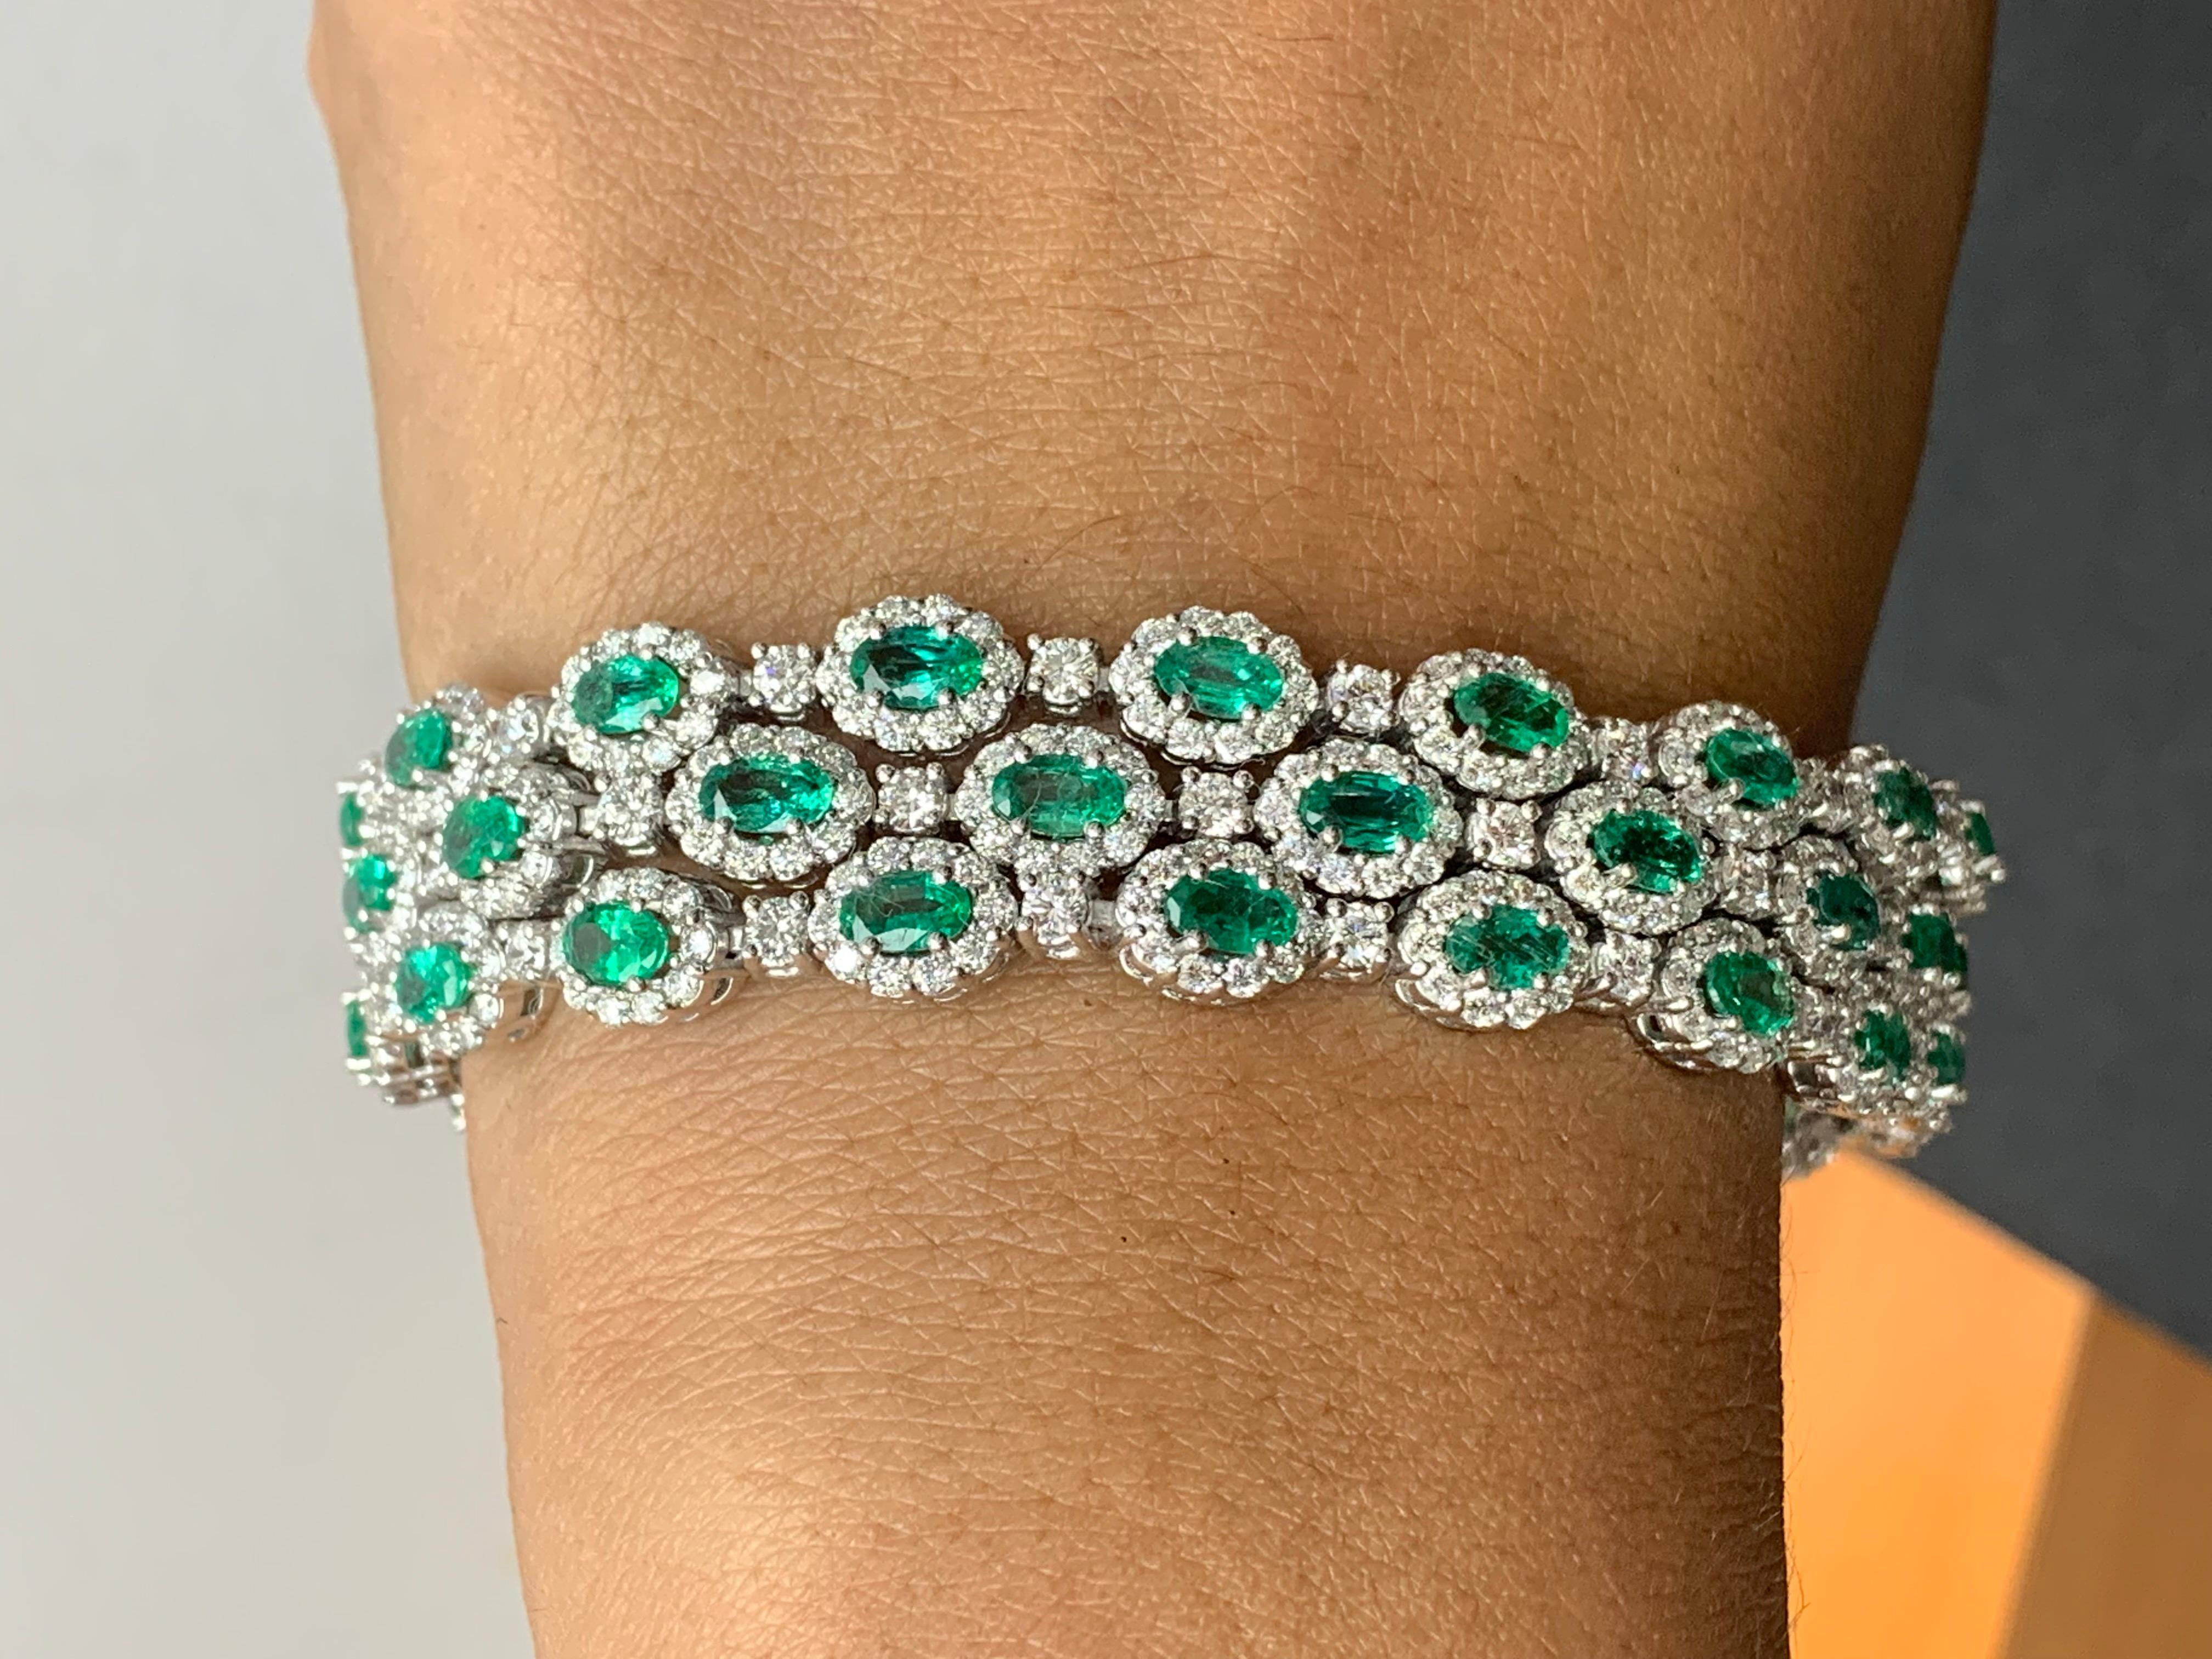 Women's 10.95 Carat Oval Cut Emerald and Diamond 3 Row Bracelet in 14K White Gold For Sale